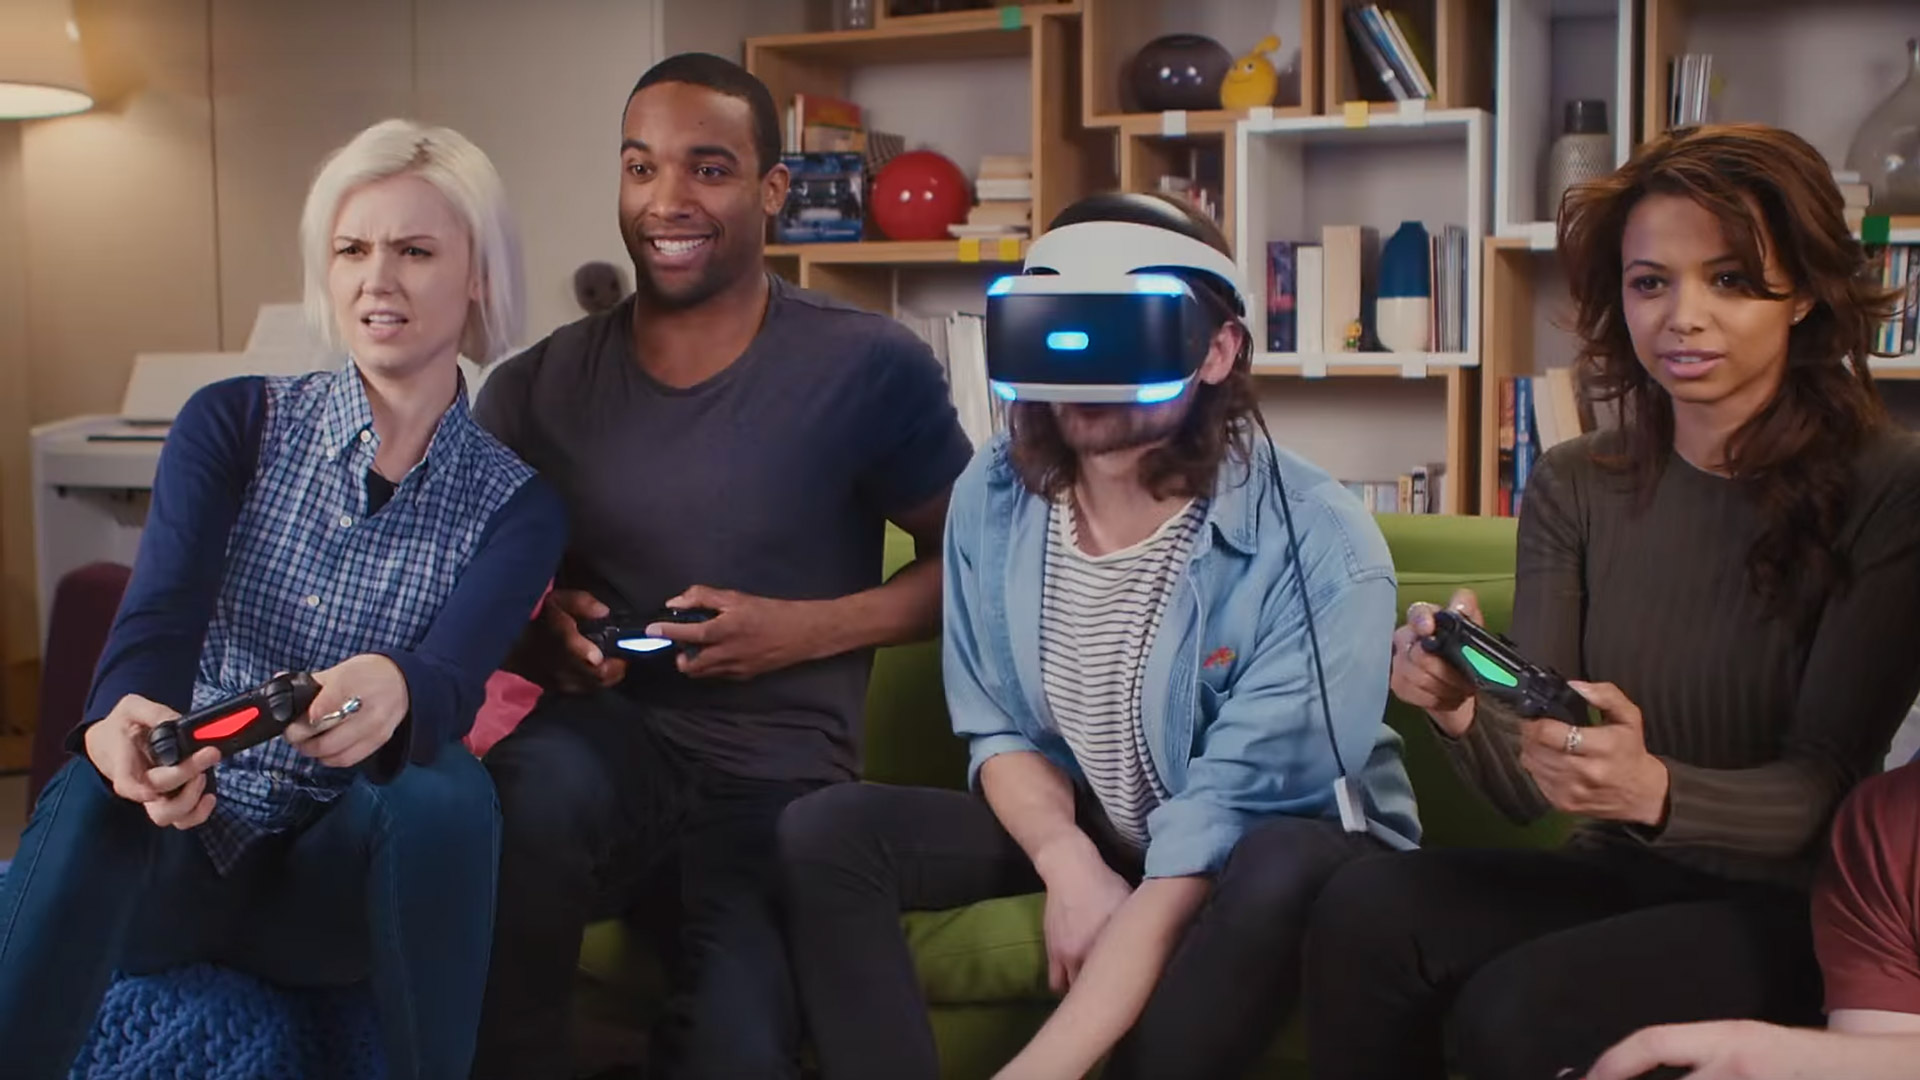 best ps4 vr family games